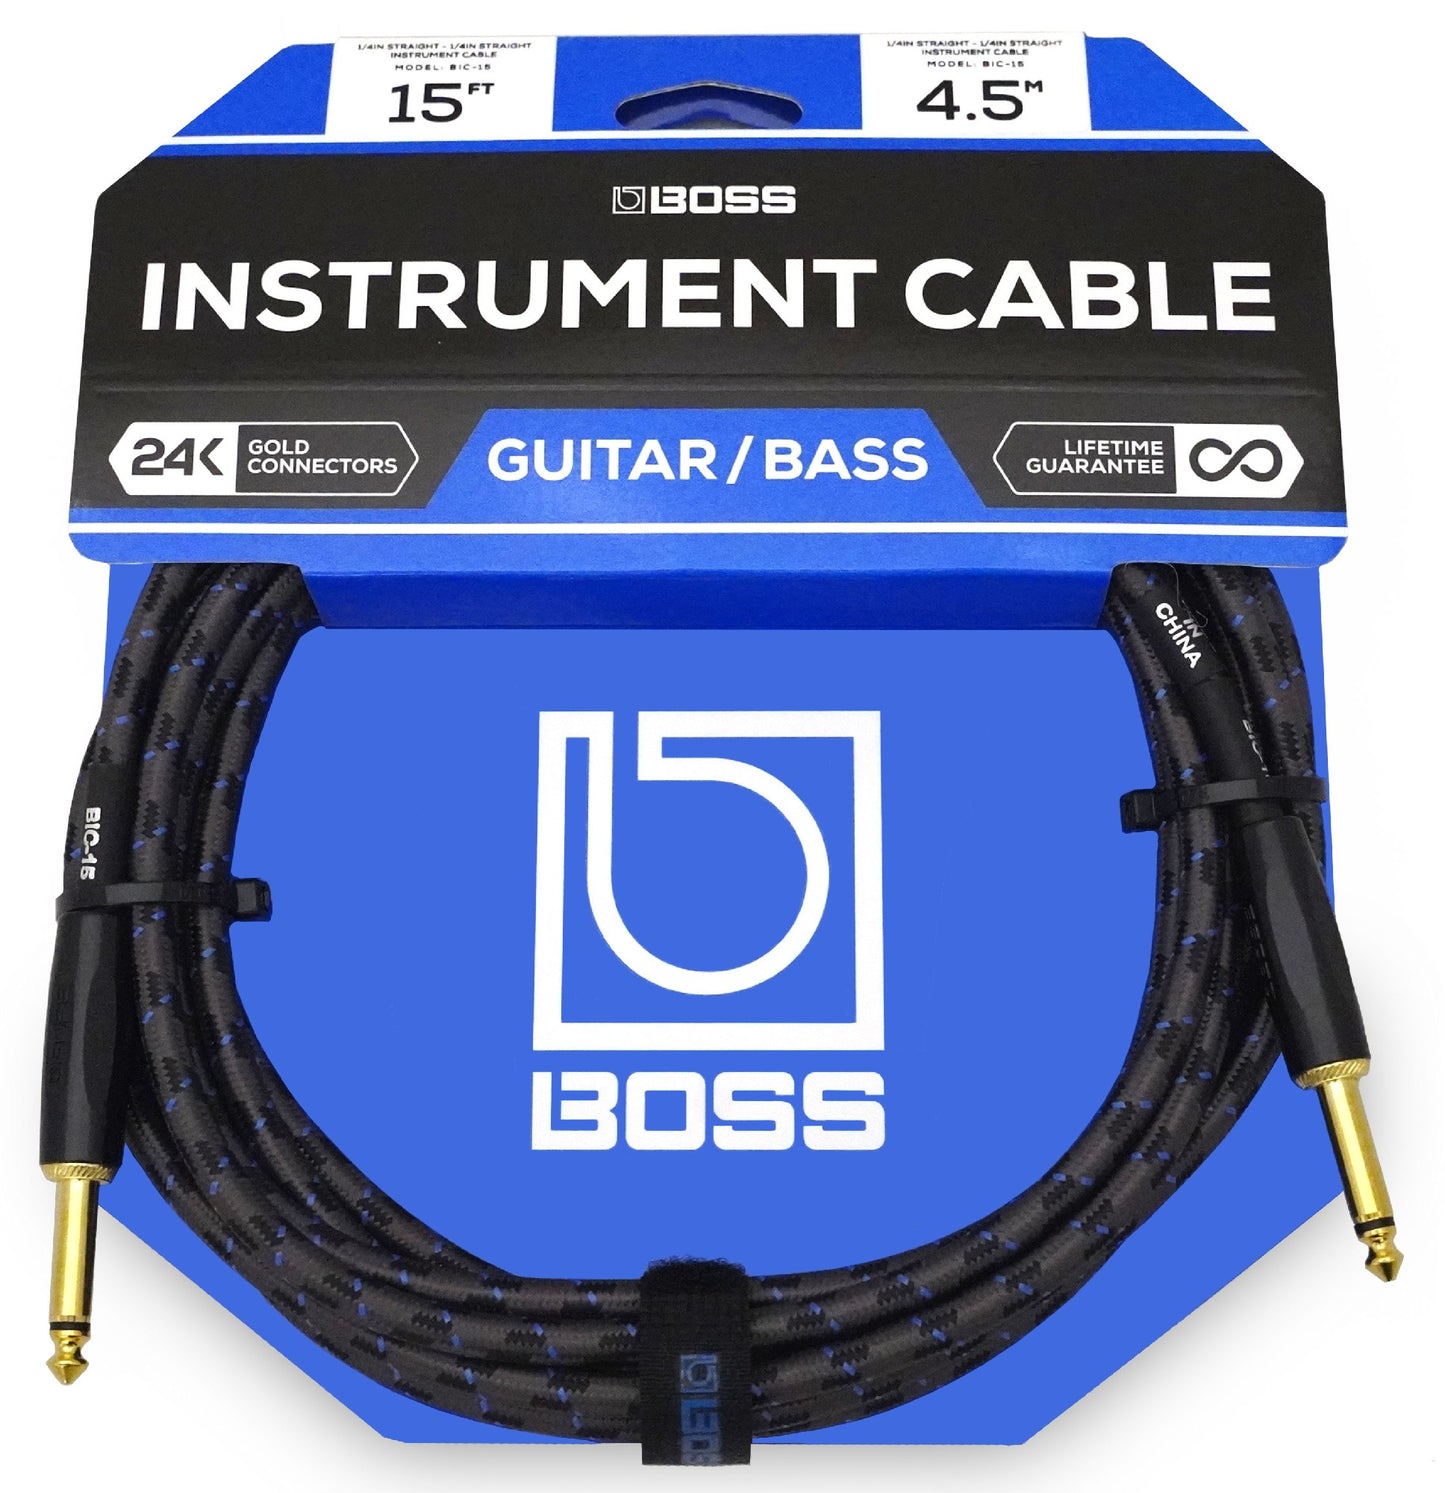 BOSS BIC-15 15FT INSTRUMENT CABLE